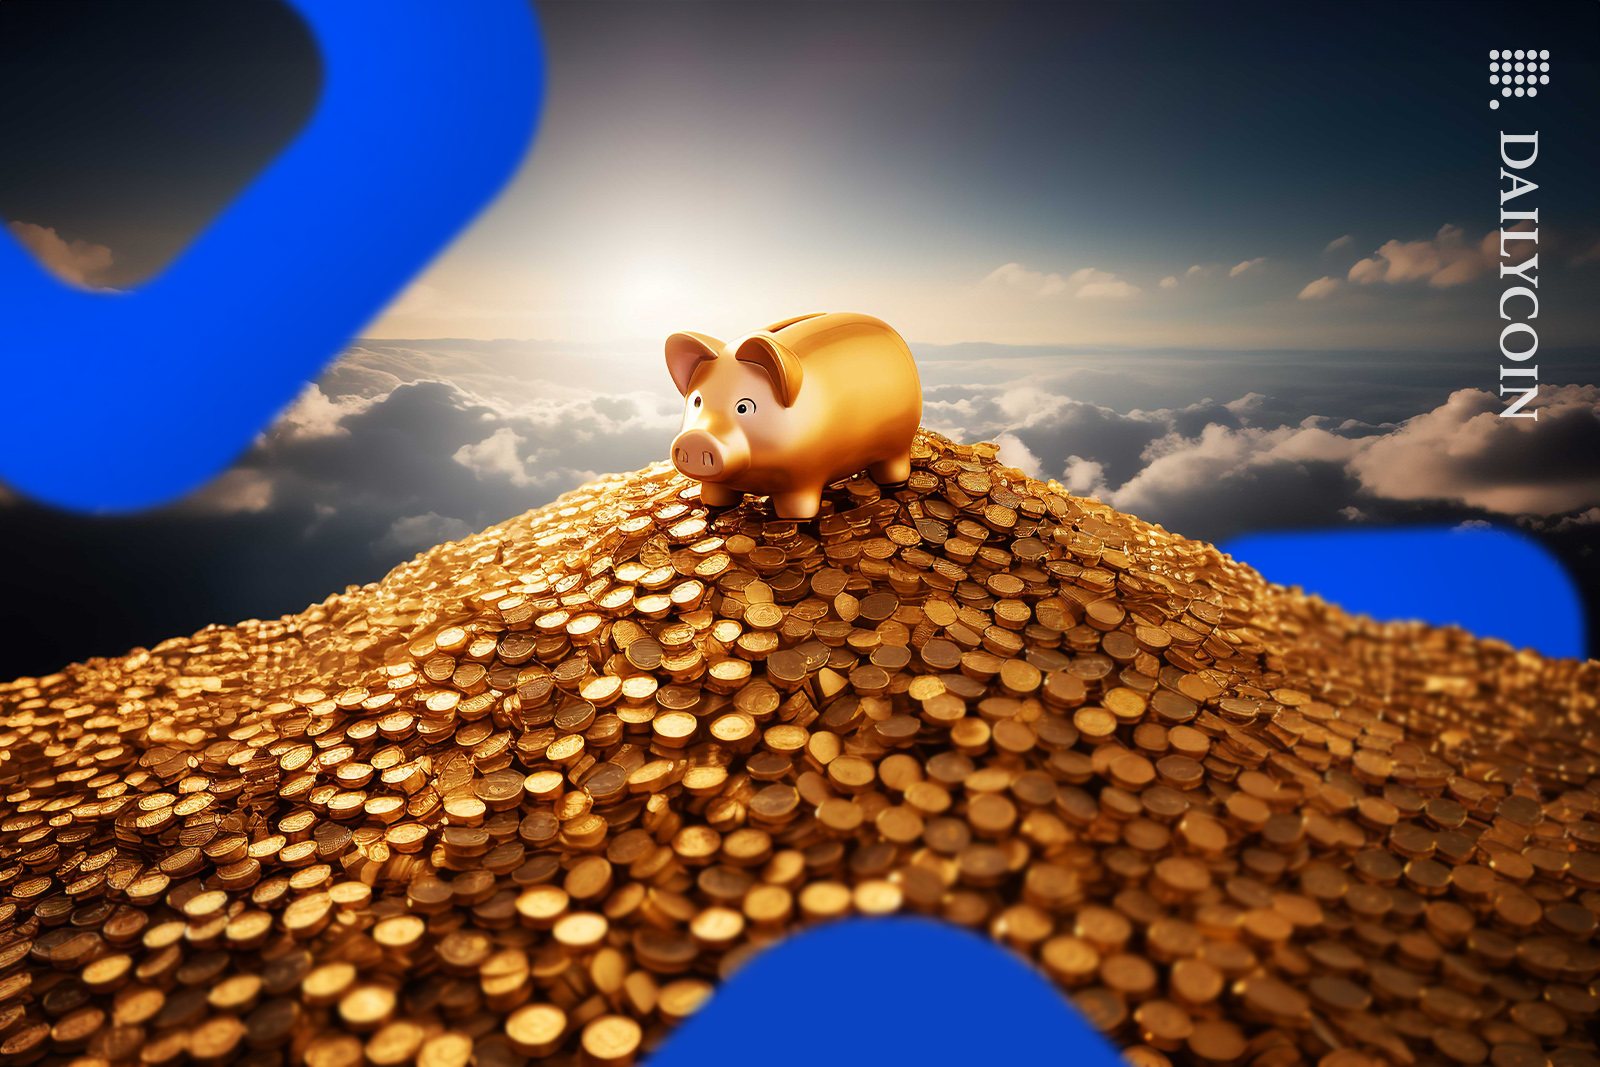 A Piggybank is on a mountain of golden coins with BlockFi logos floating around.